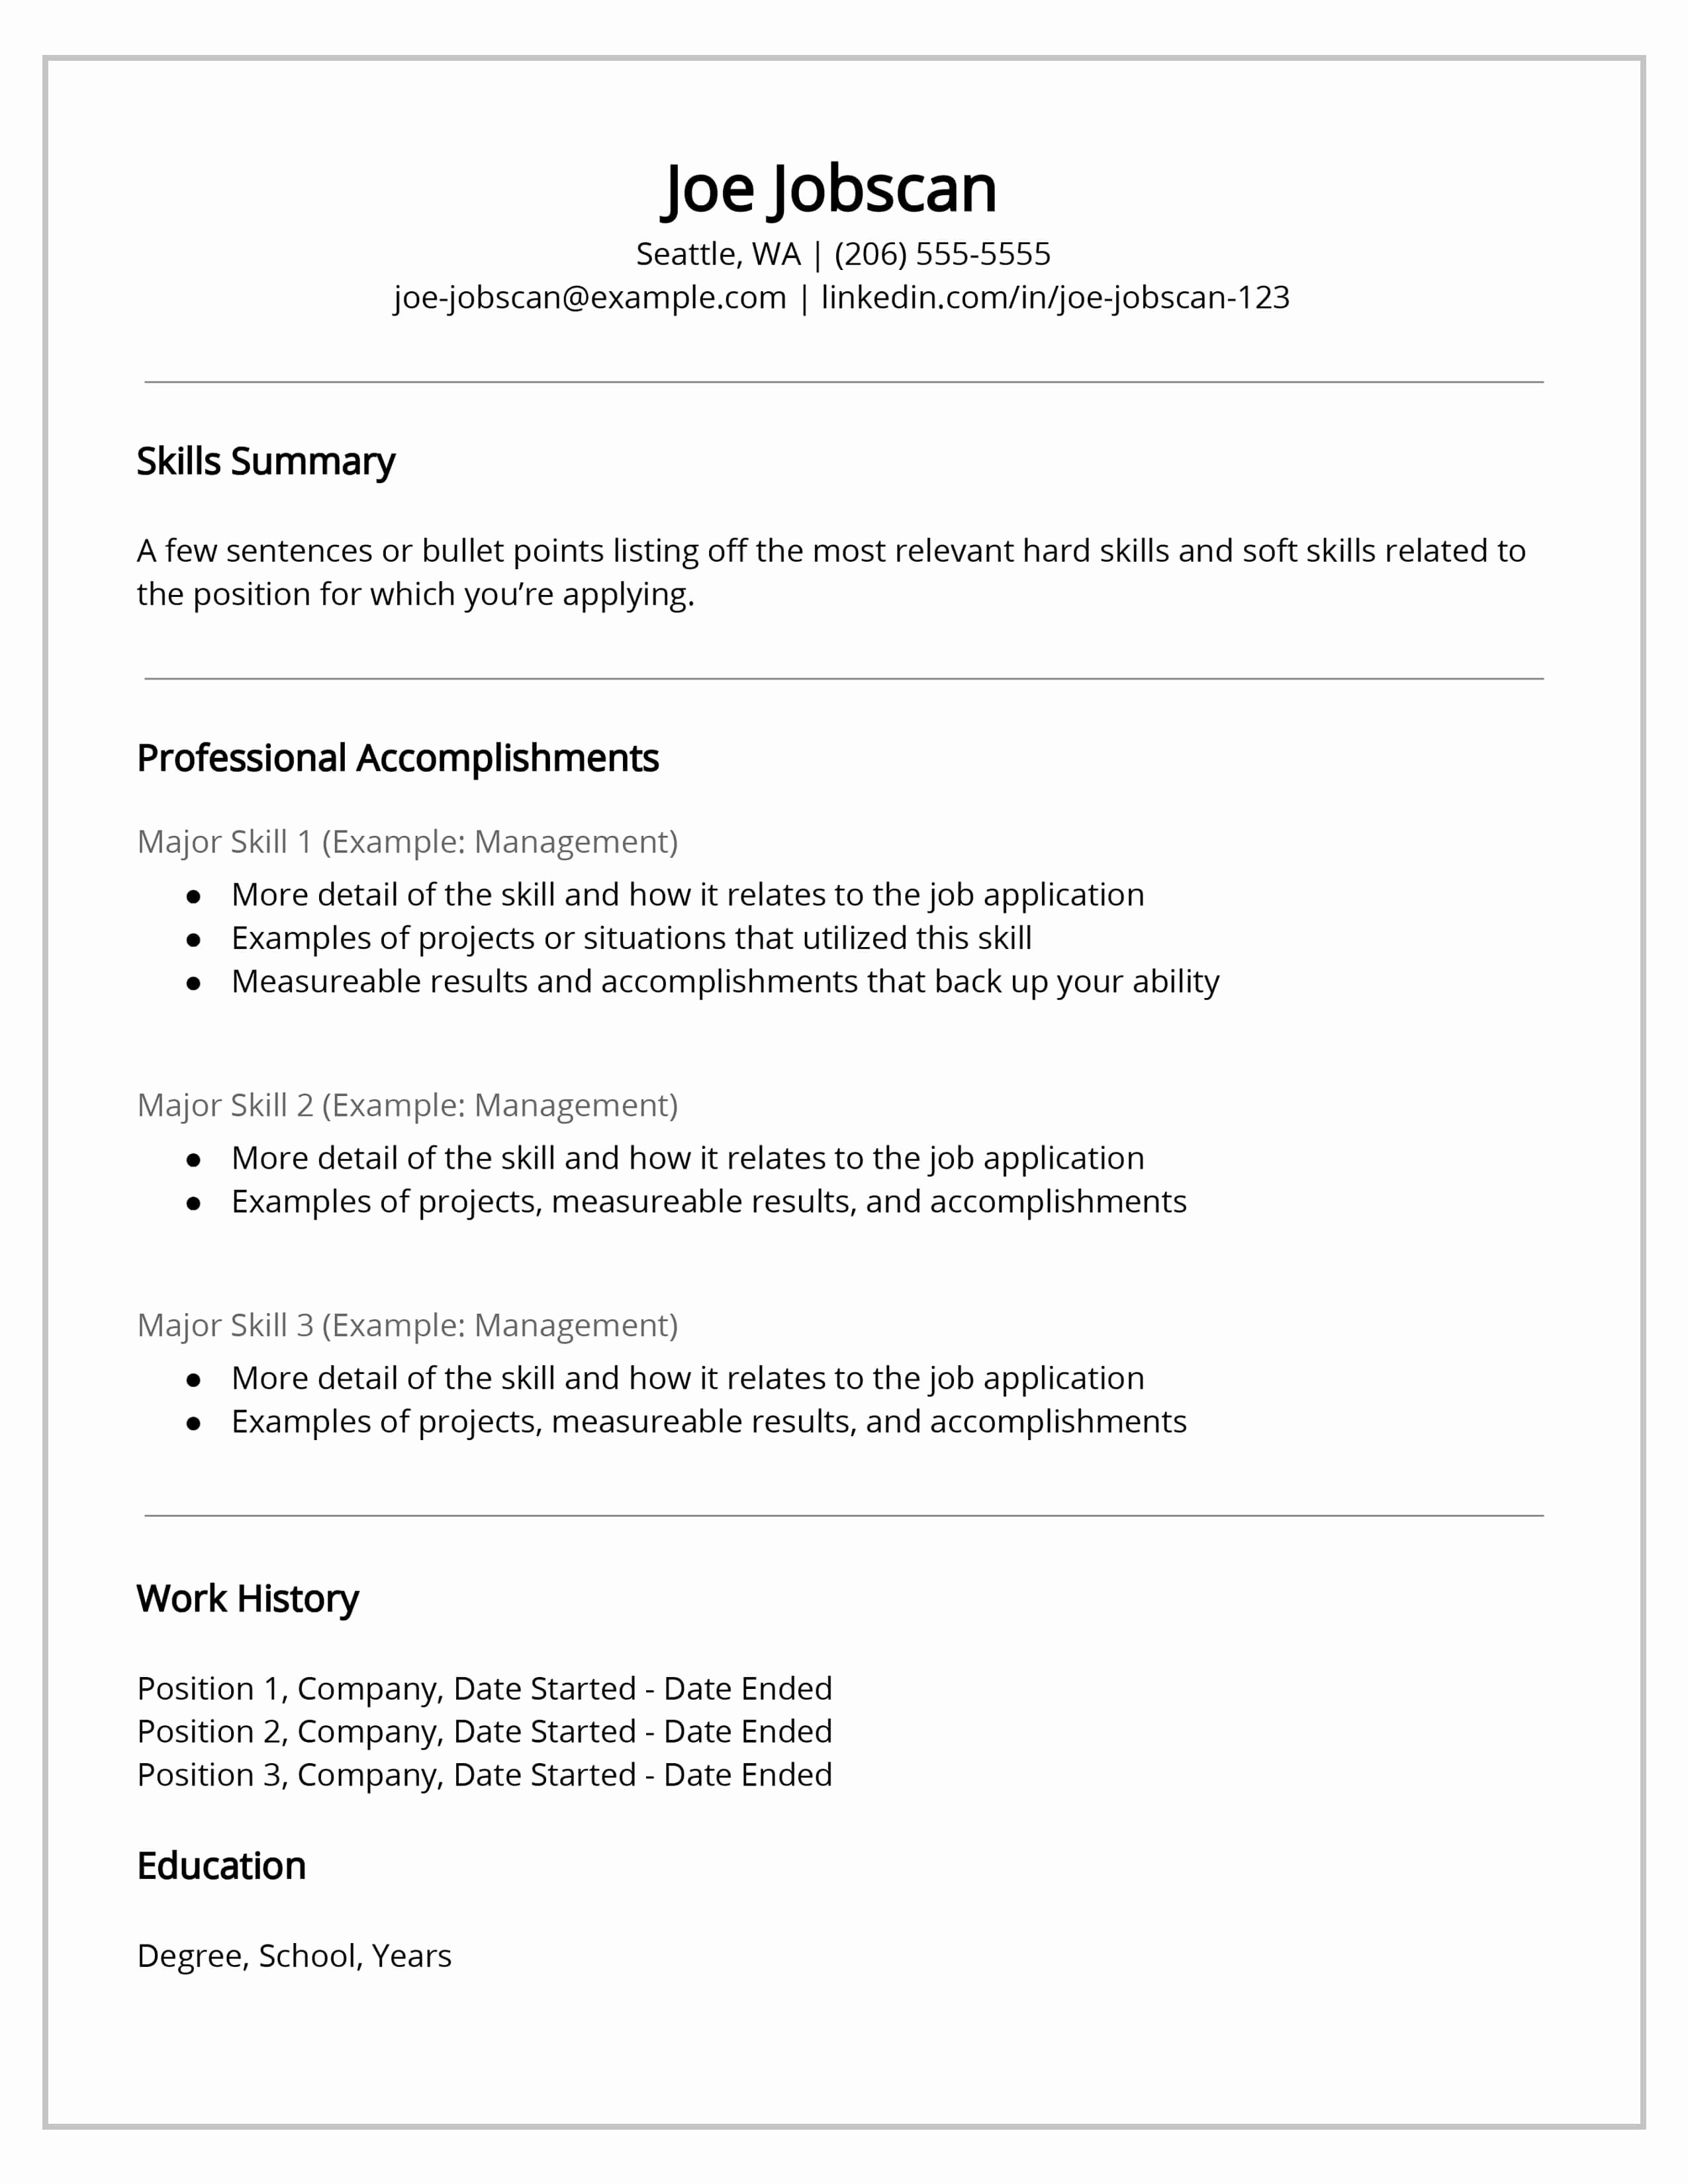 Functional Resume Templates Word Awesome why Recruiters Hate the Functional Resume format Jobscan